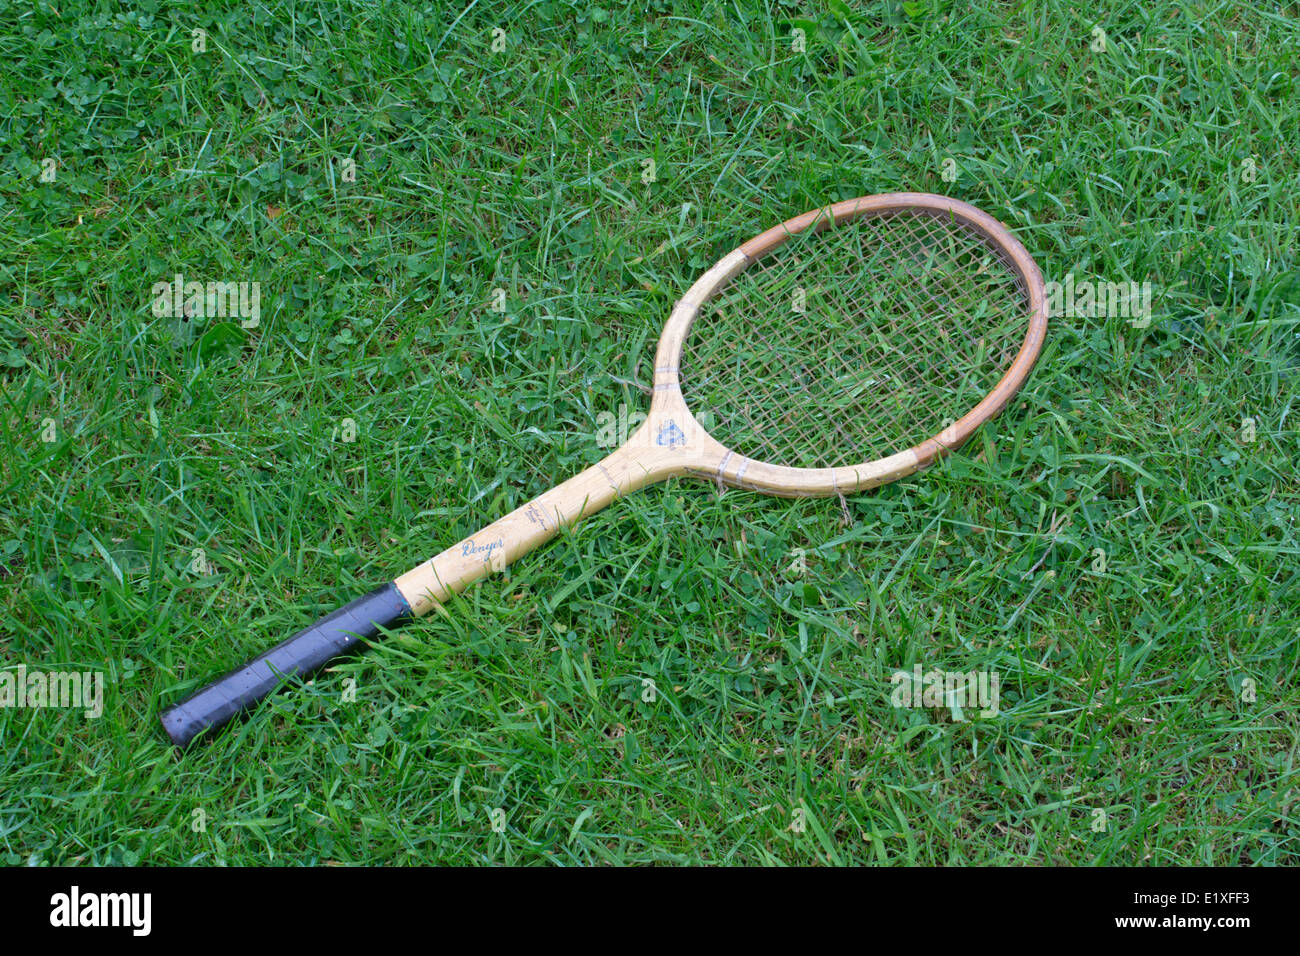 Old Dunlop Invincible Denyer tennis racquet discarded on grass Stock Photo